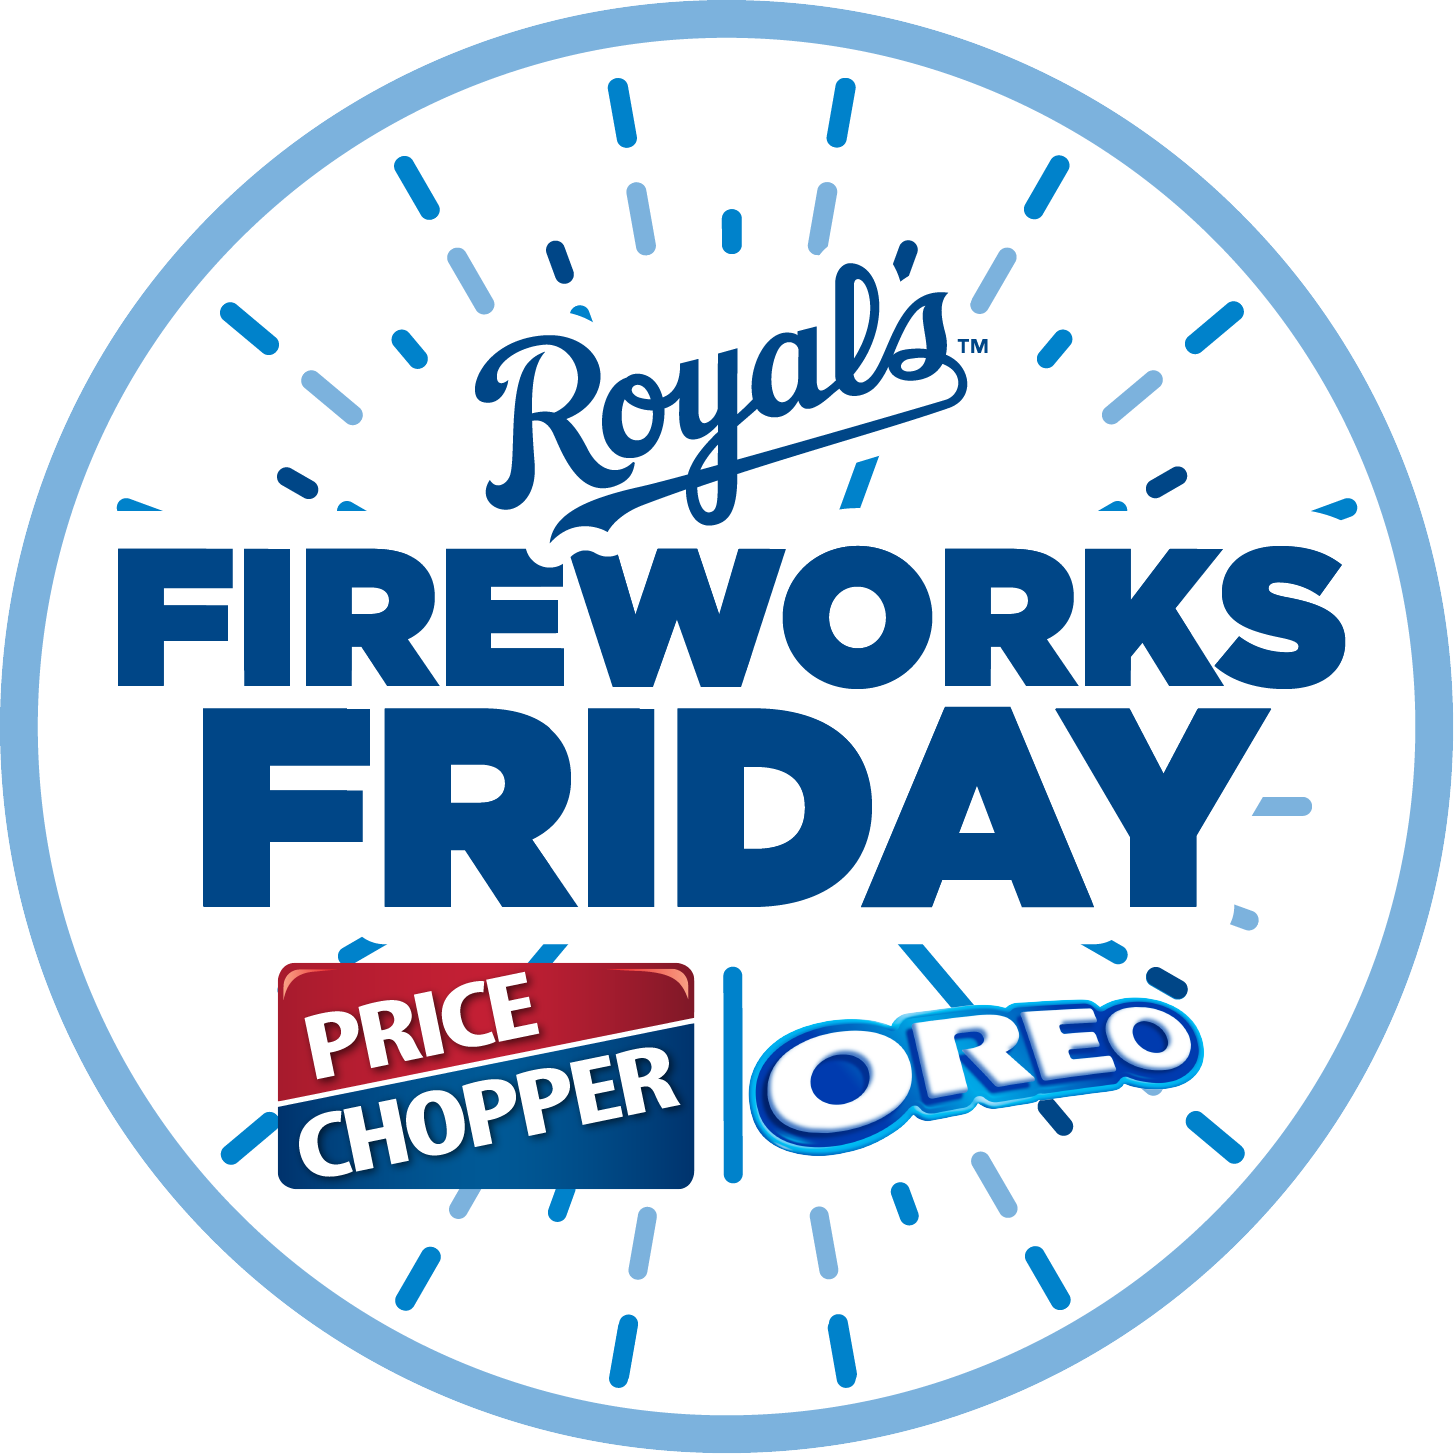 Fireworks Friday at the K!